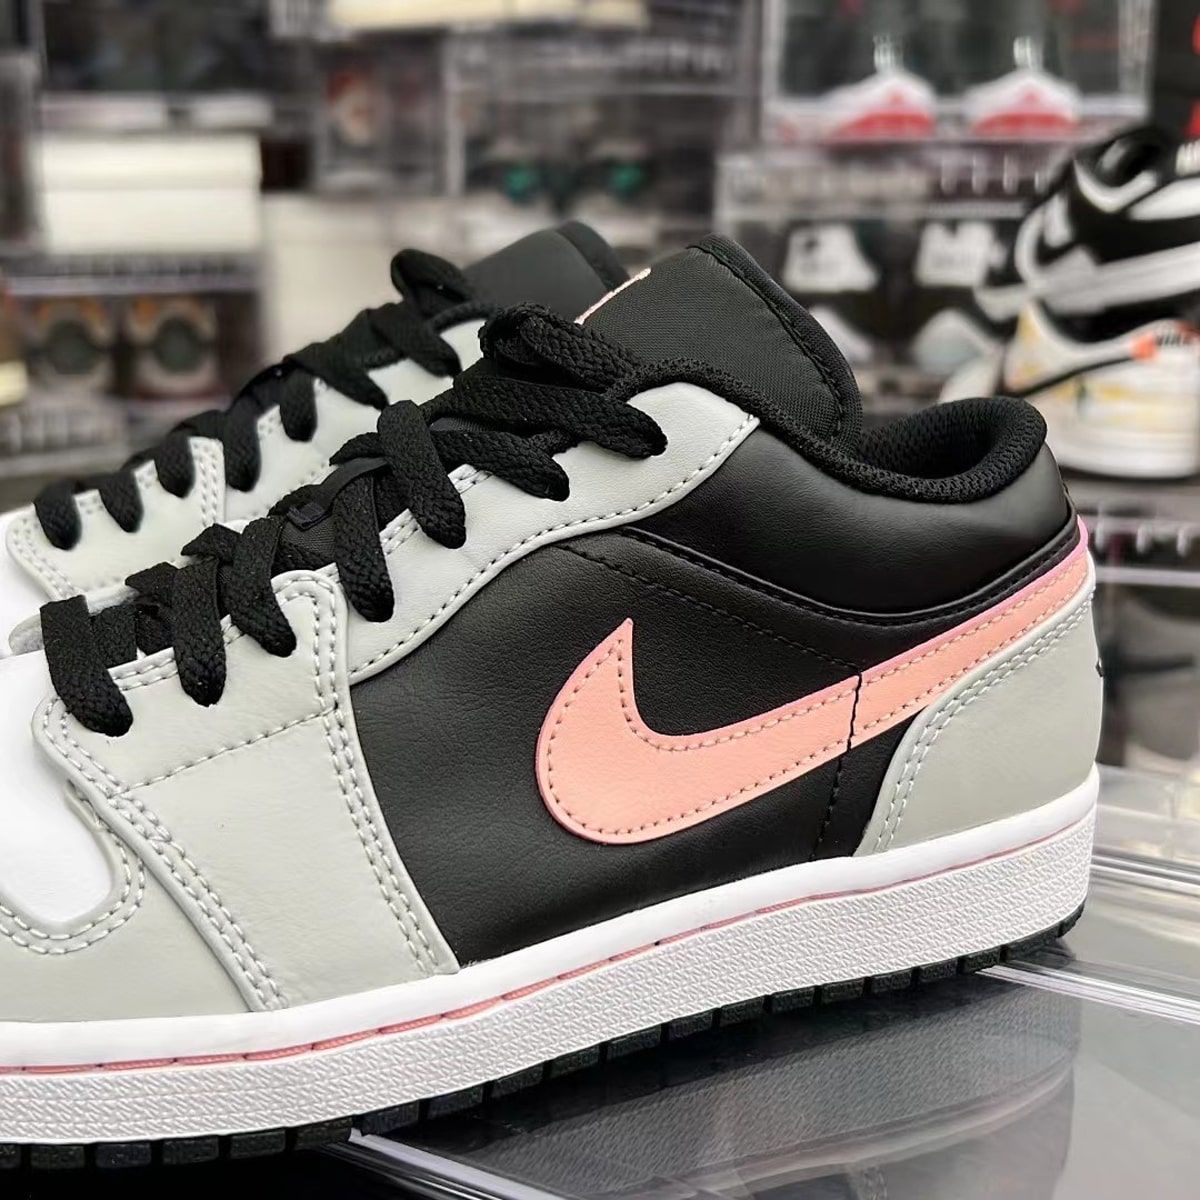 New Air Jordan 1 Low Appears in Black, Grey and Pink | HOUSE OF HEAT